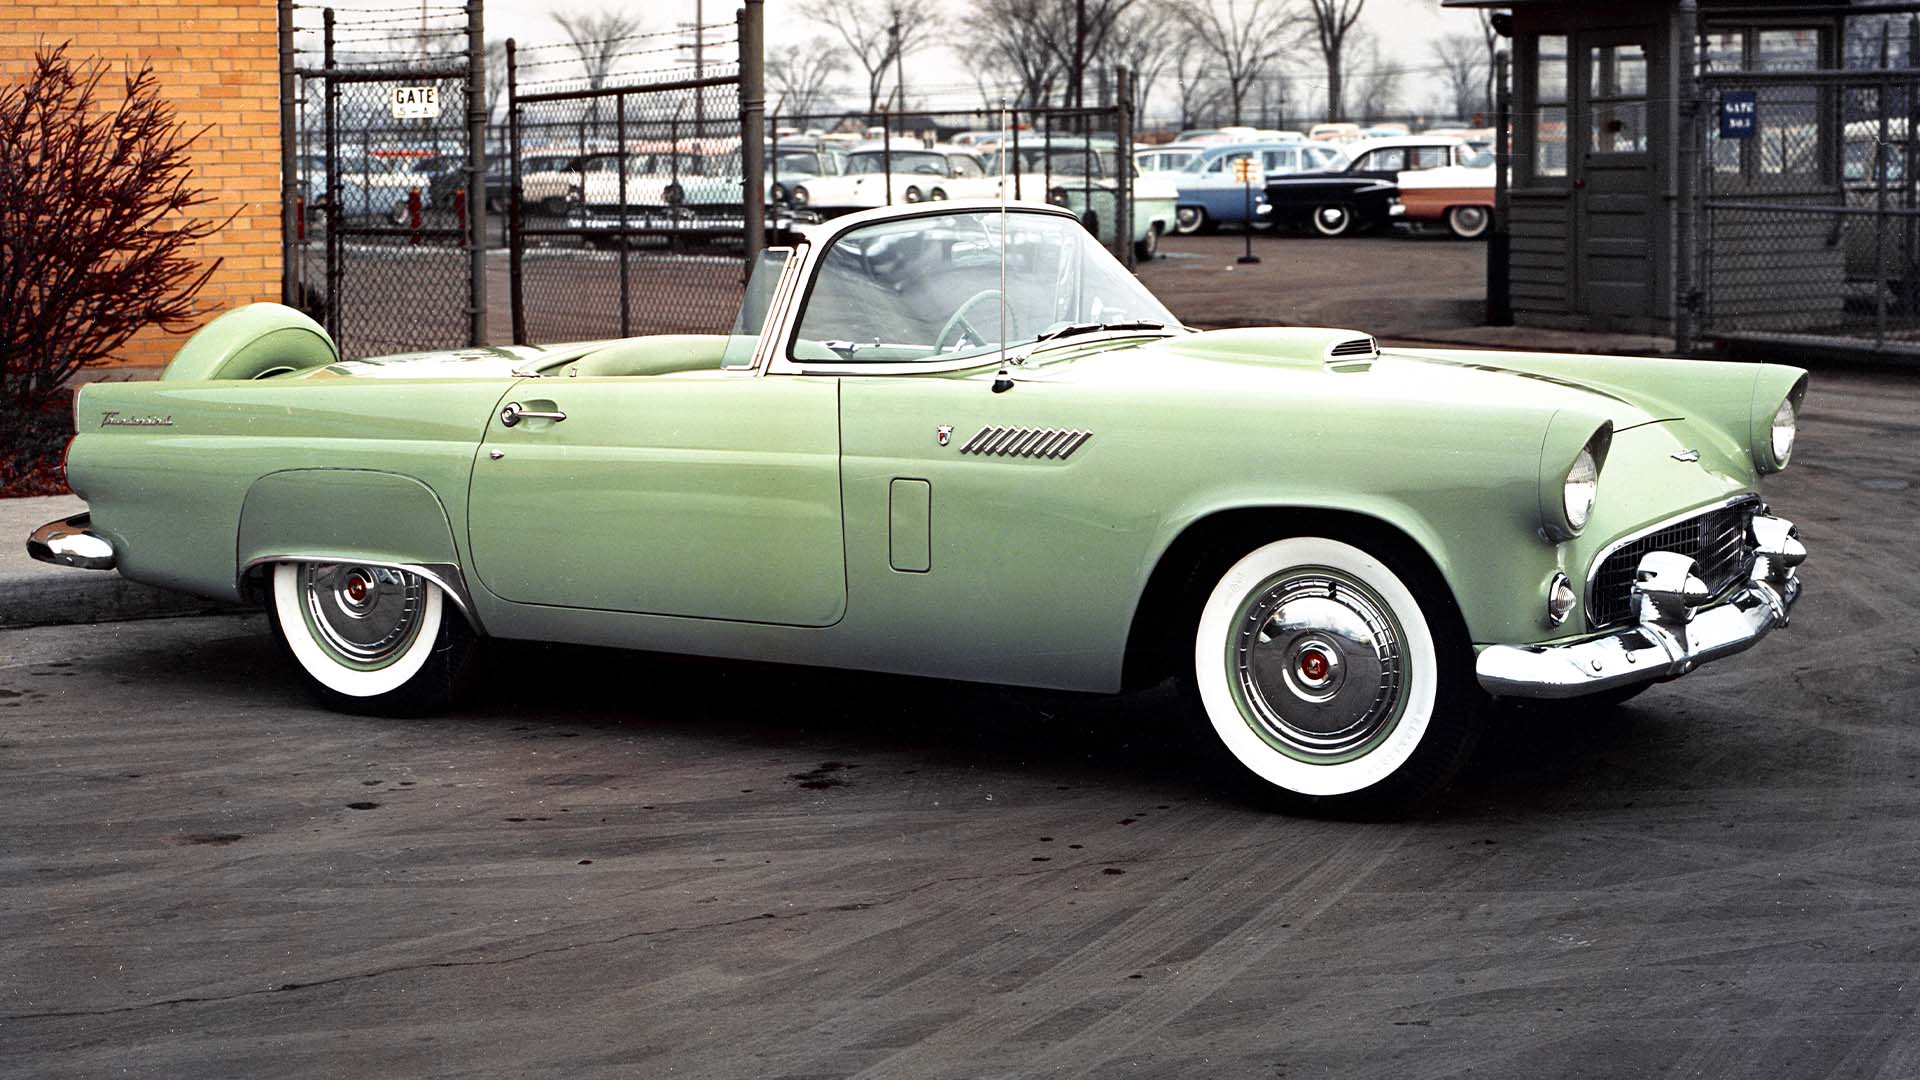 Ford Thunderbird Might Be Revived as a Corvette Fighter: Report